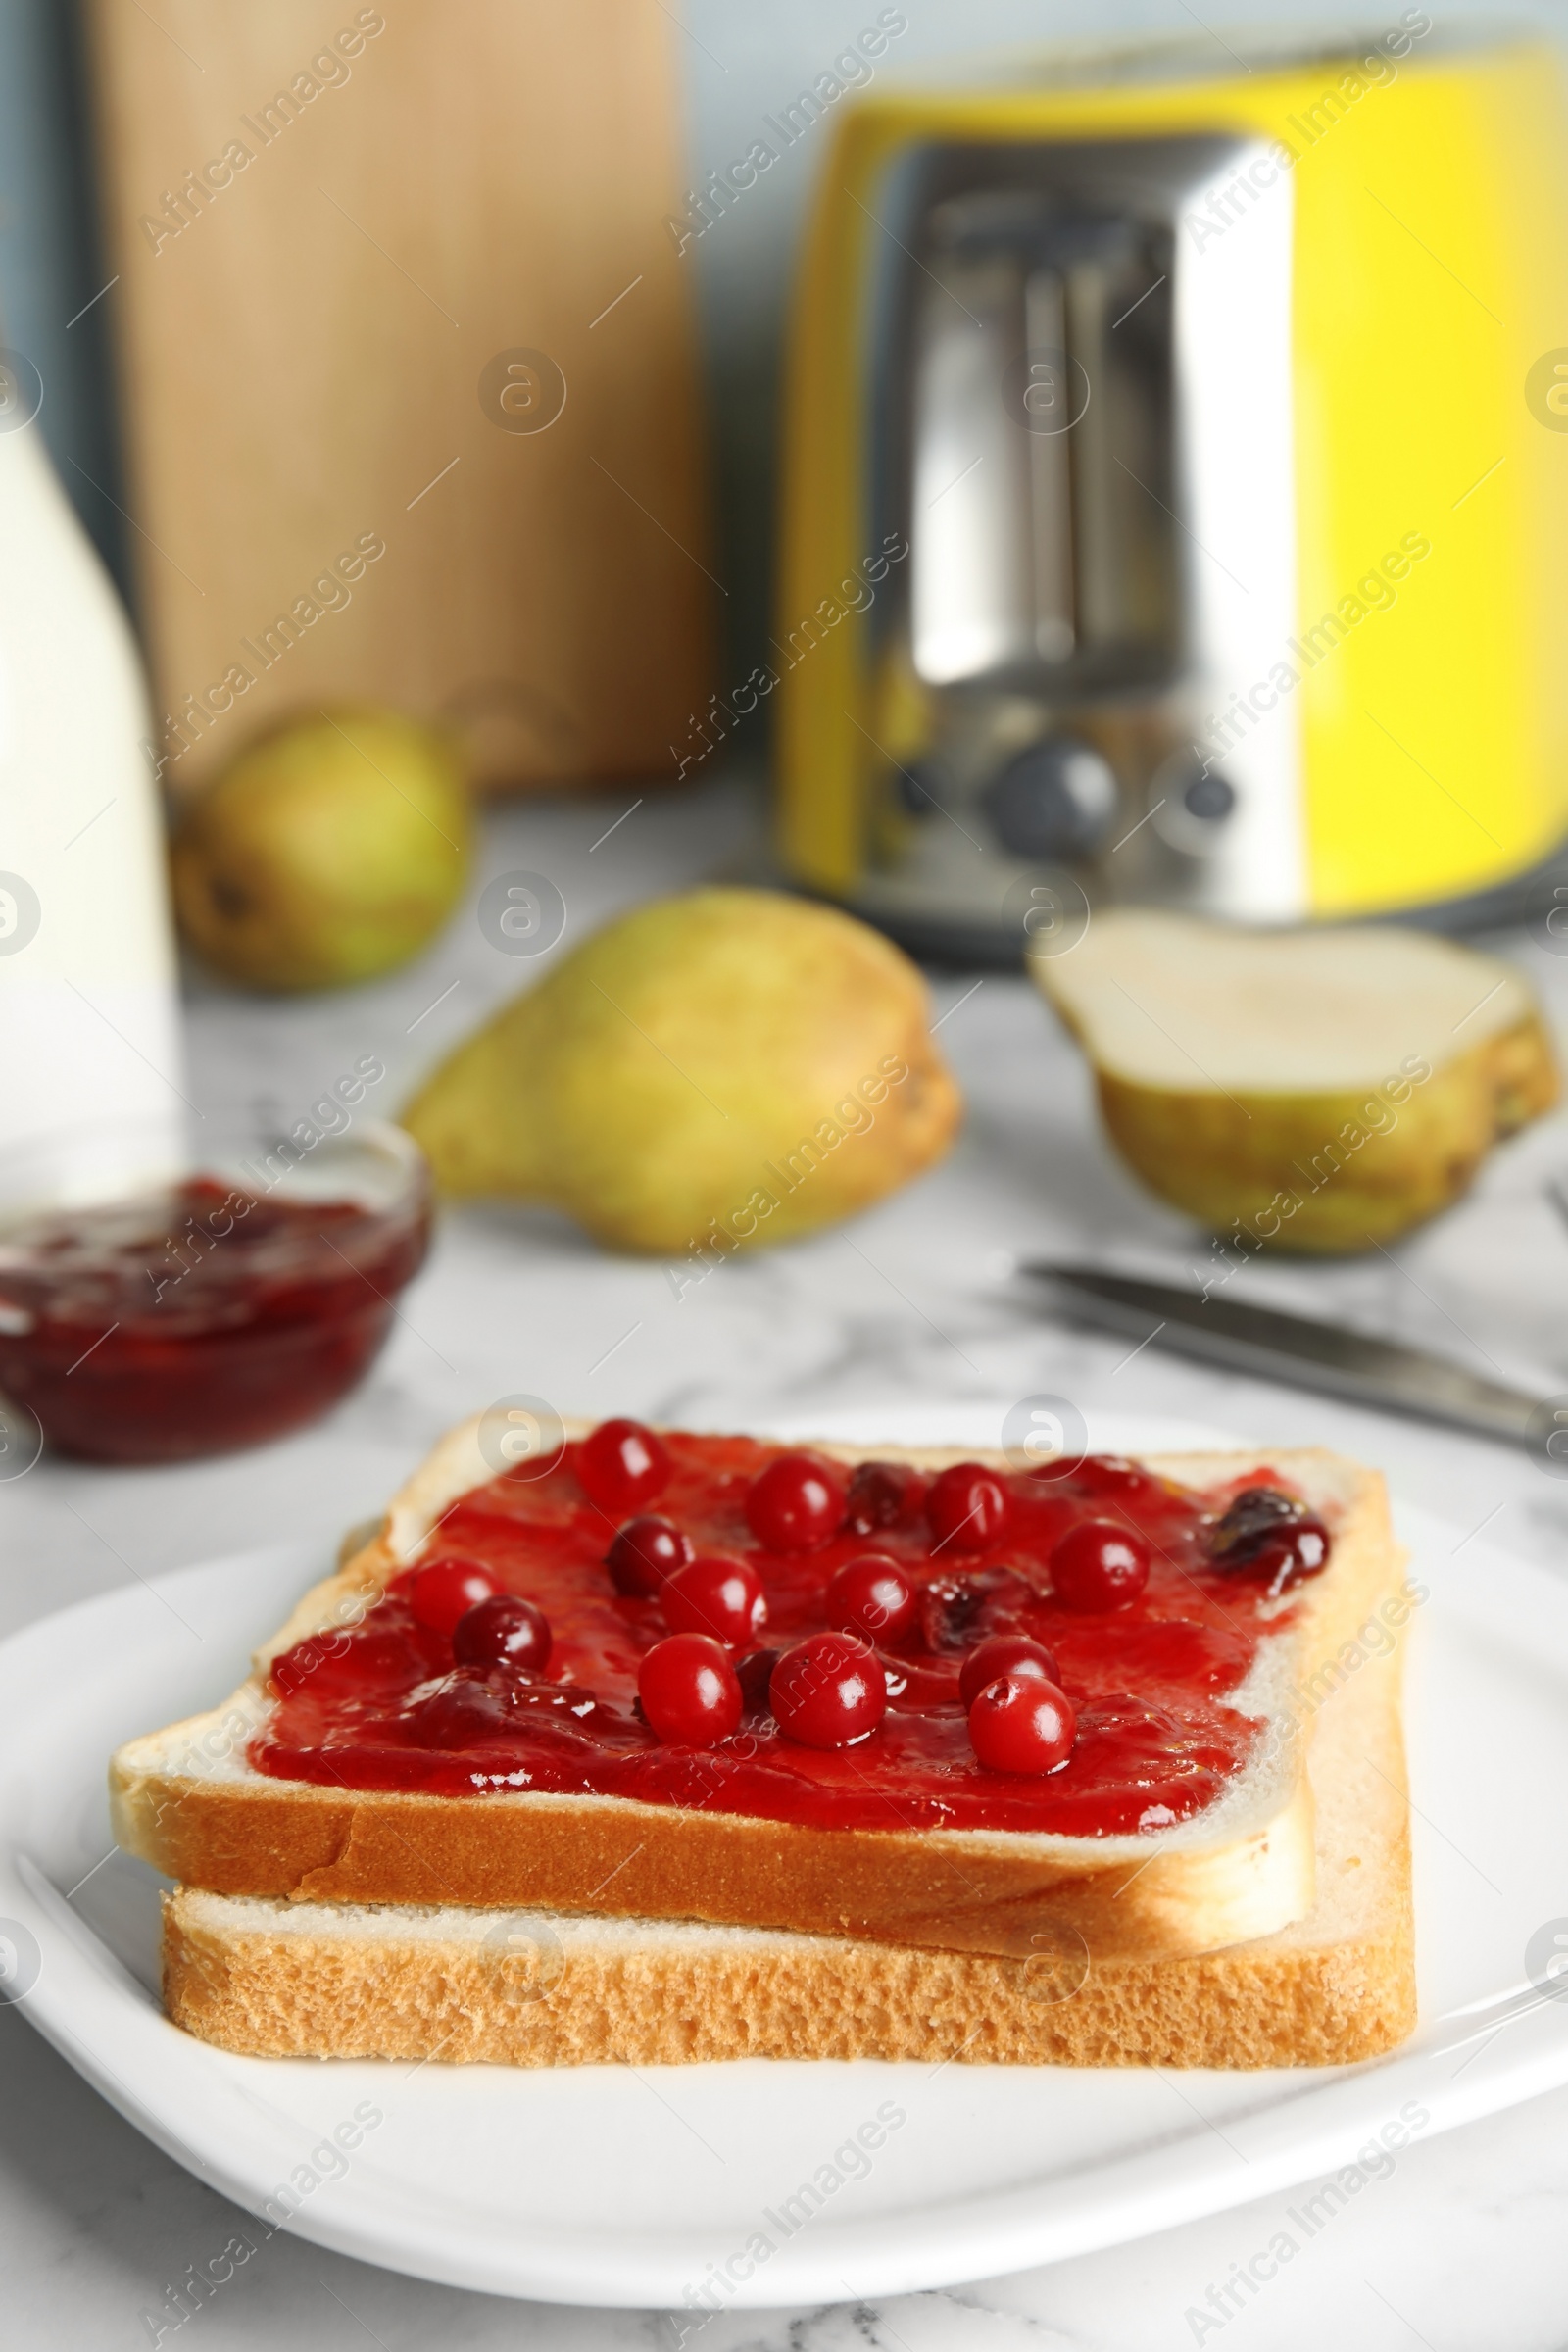 Photo of Slice of bread with jam on plate